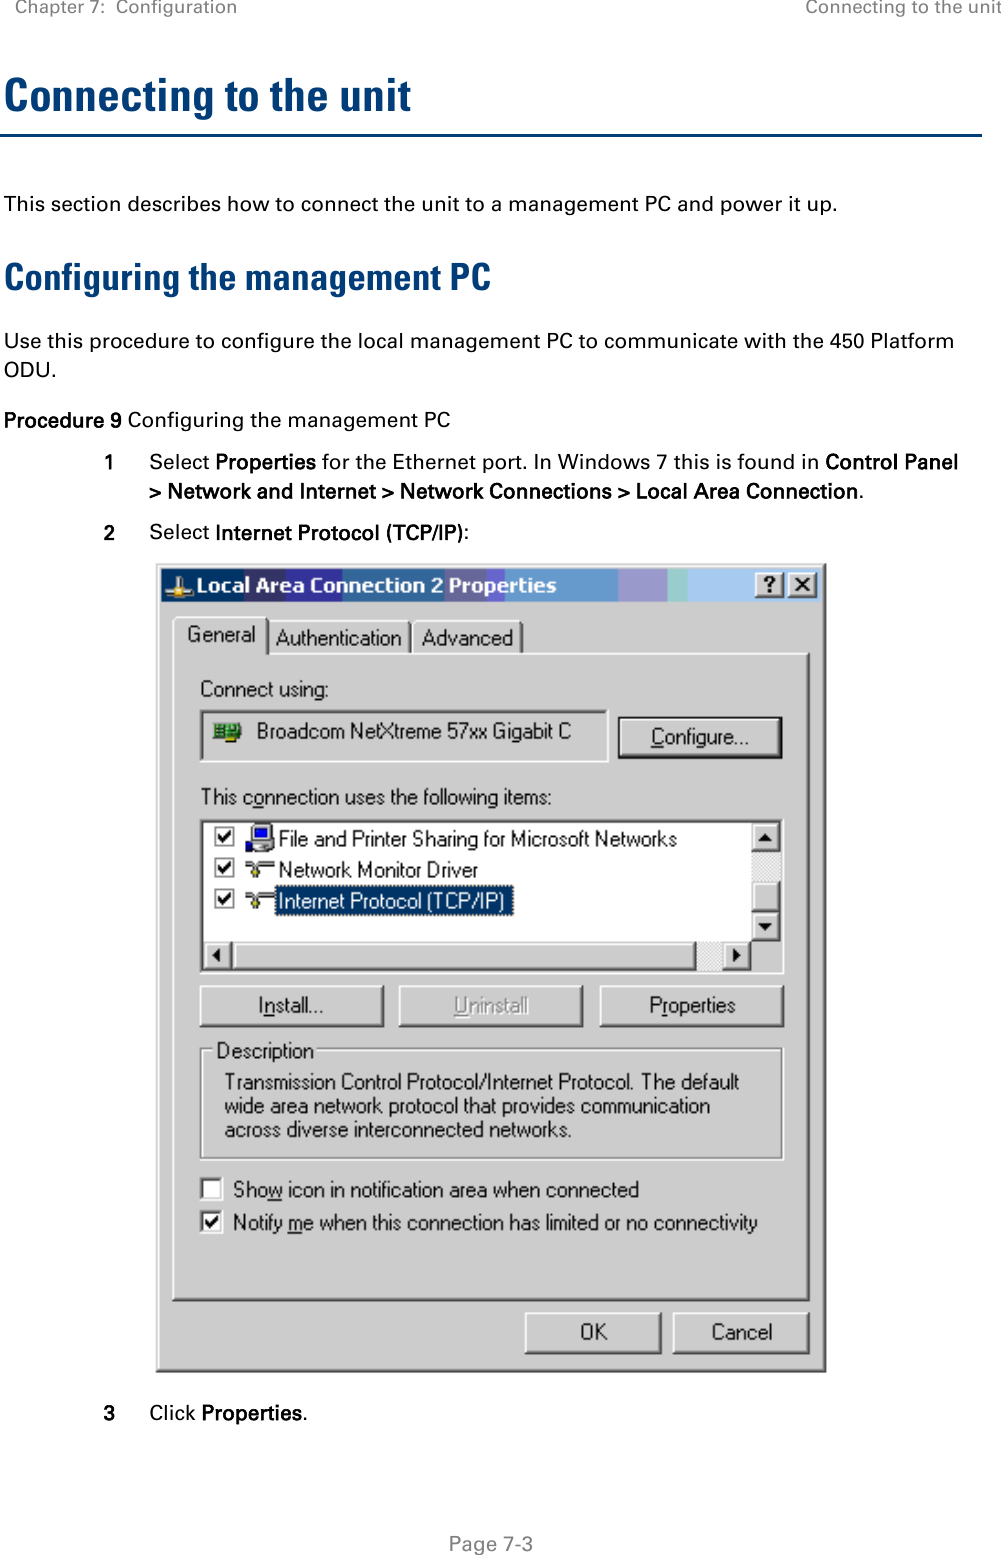 Chapter 7:  Configuration Connecting to the unit   Page 7-3 Connecting to the unit This section describes how to connect the unit to a management PC and power it up. Configuring the management PC Use this procedure to configure the local management PC to communicate with the 450 Platform ODU. Procedure 9 Configuring the management PC 1 Select Properties for the Ethernet port. In Windows 7 this is found in Control Panel &gt; Network and Internet &gt; Network Connections &gt; Local Area Connection. 2 Select Internet Protocol (TCP/IP):  3 Click Properties. 